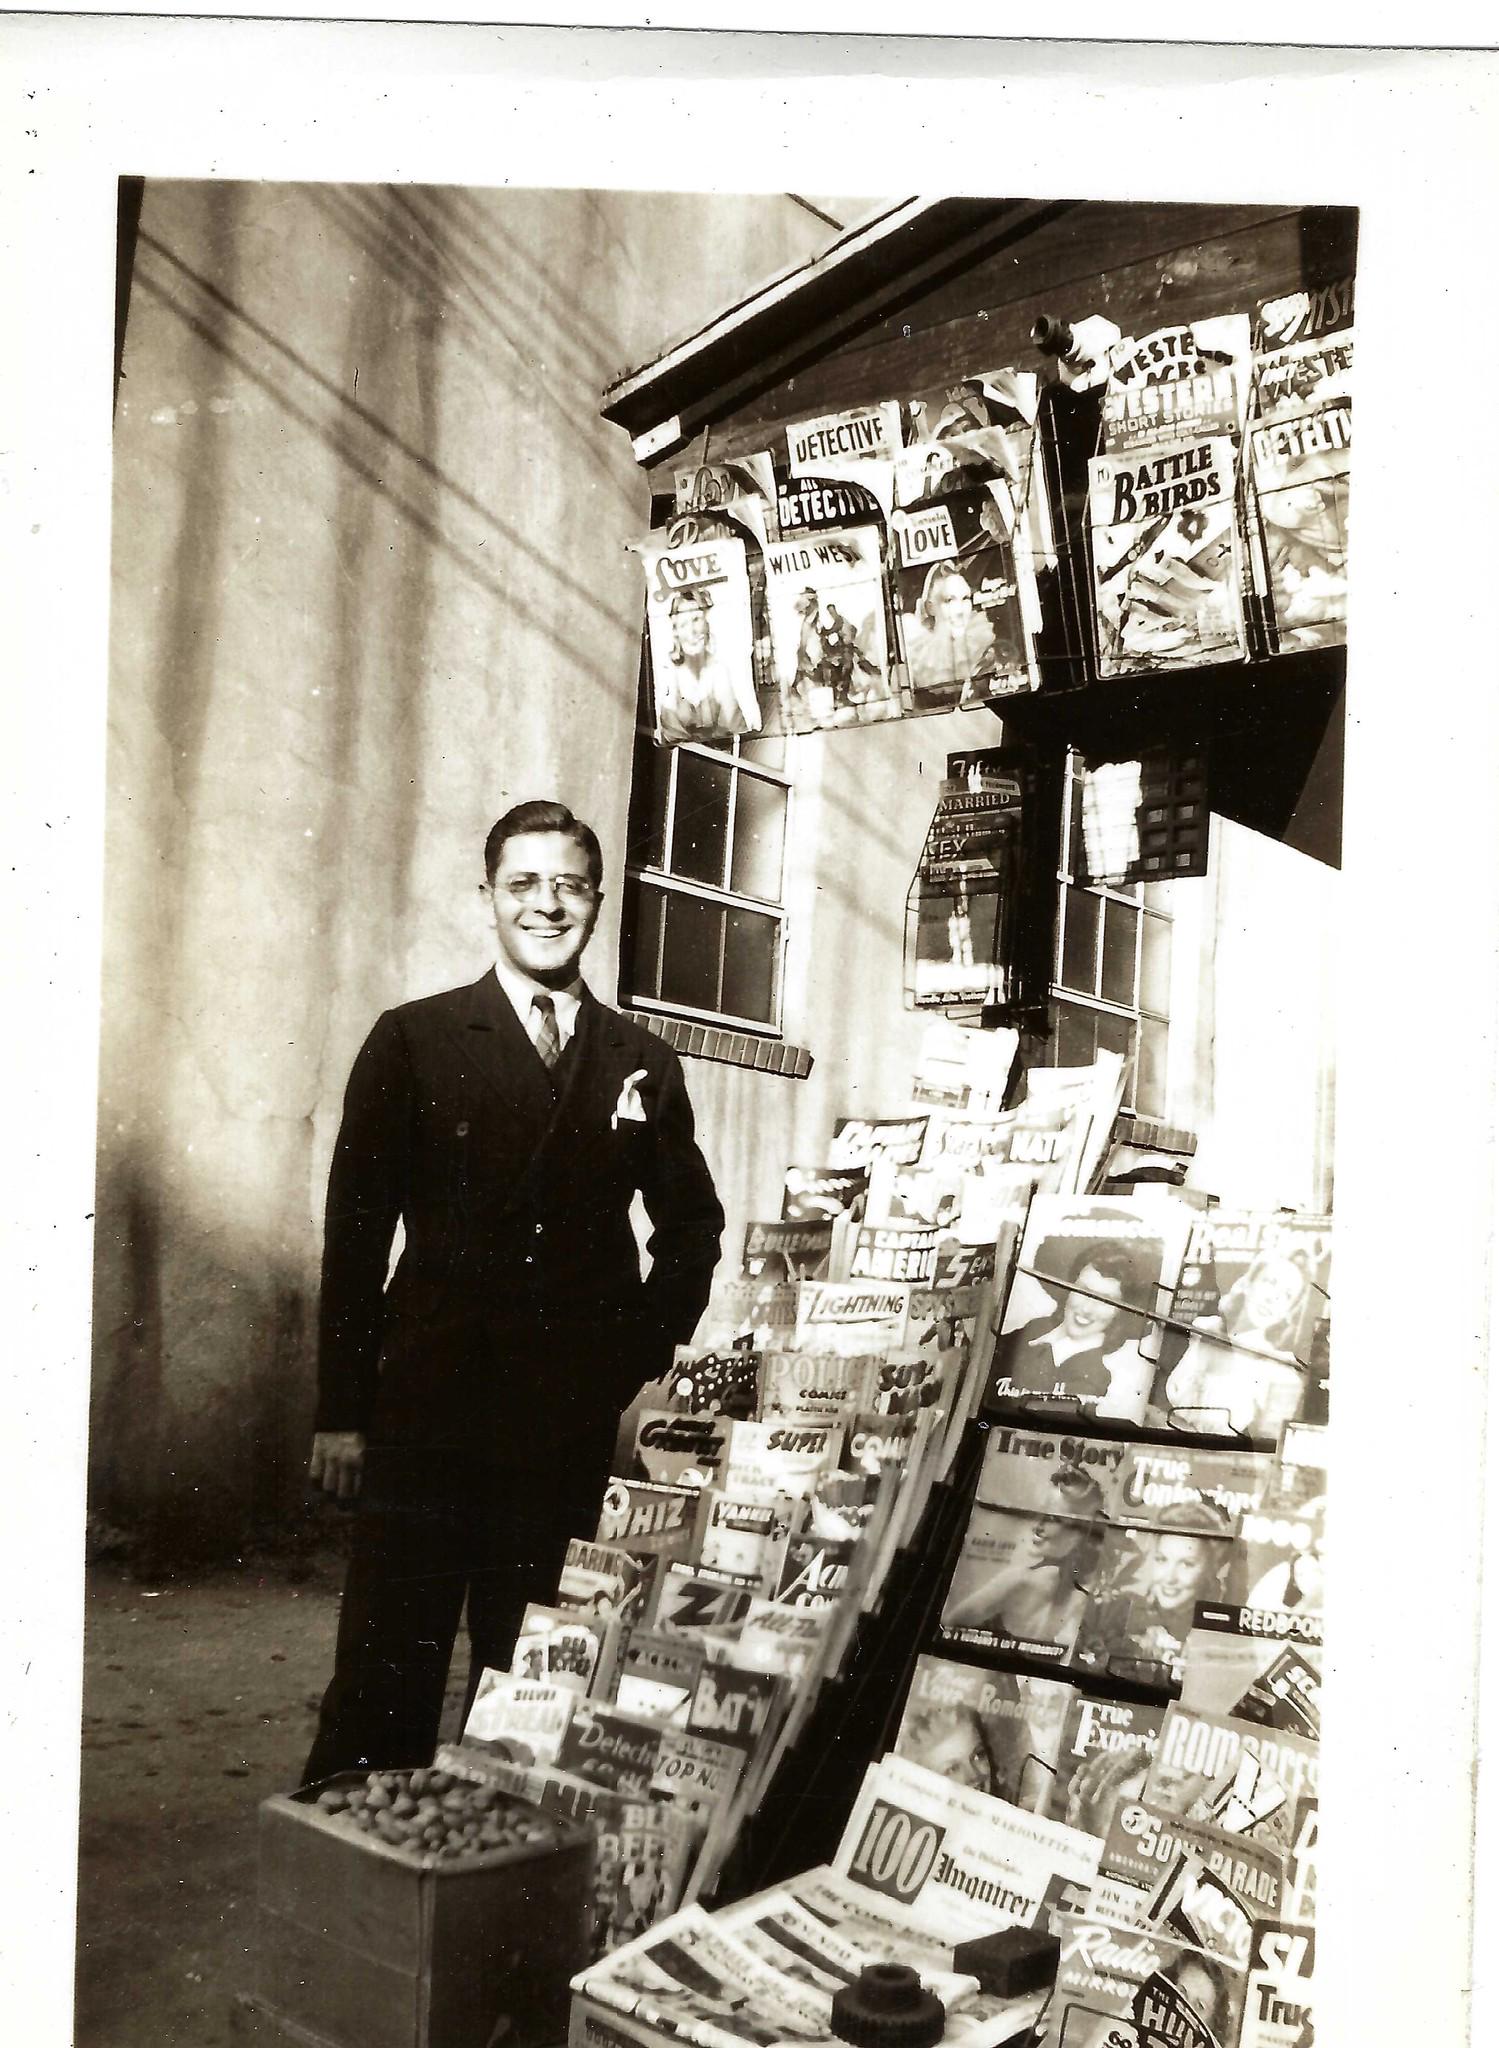 My grandfather, Kurt Sax, opened a News Stand in New York City after moving the USA. He sold Golden Age comic books and magazines. (1939).jpeg